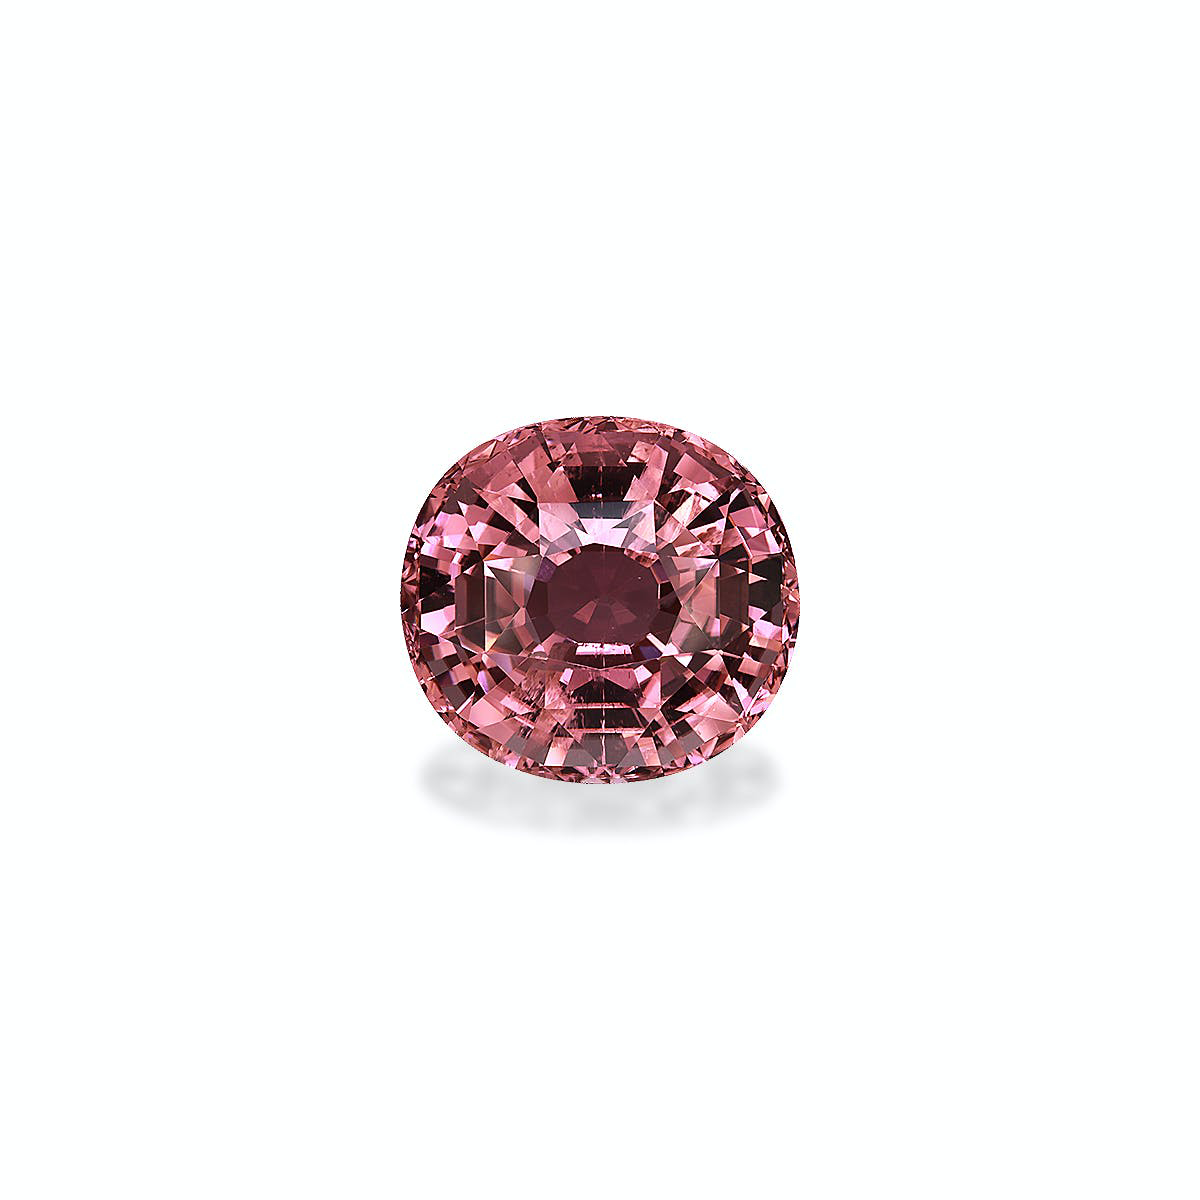 Picture of Flamingo Pink Tourmaline 26.56ct - 19x17mm (PT0193)